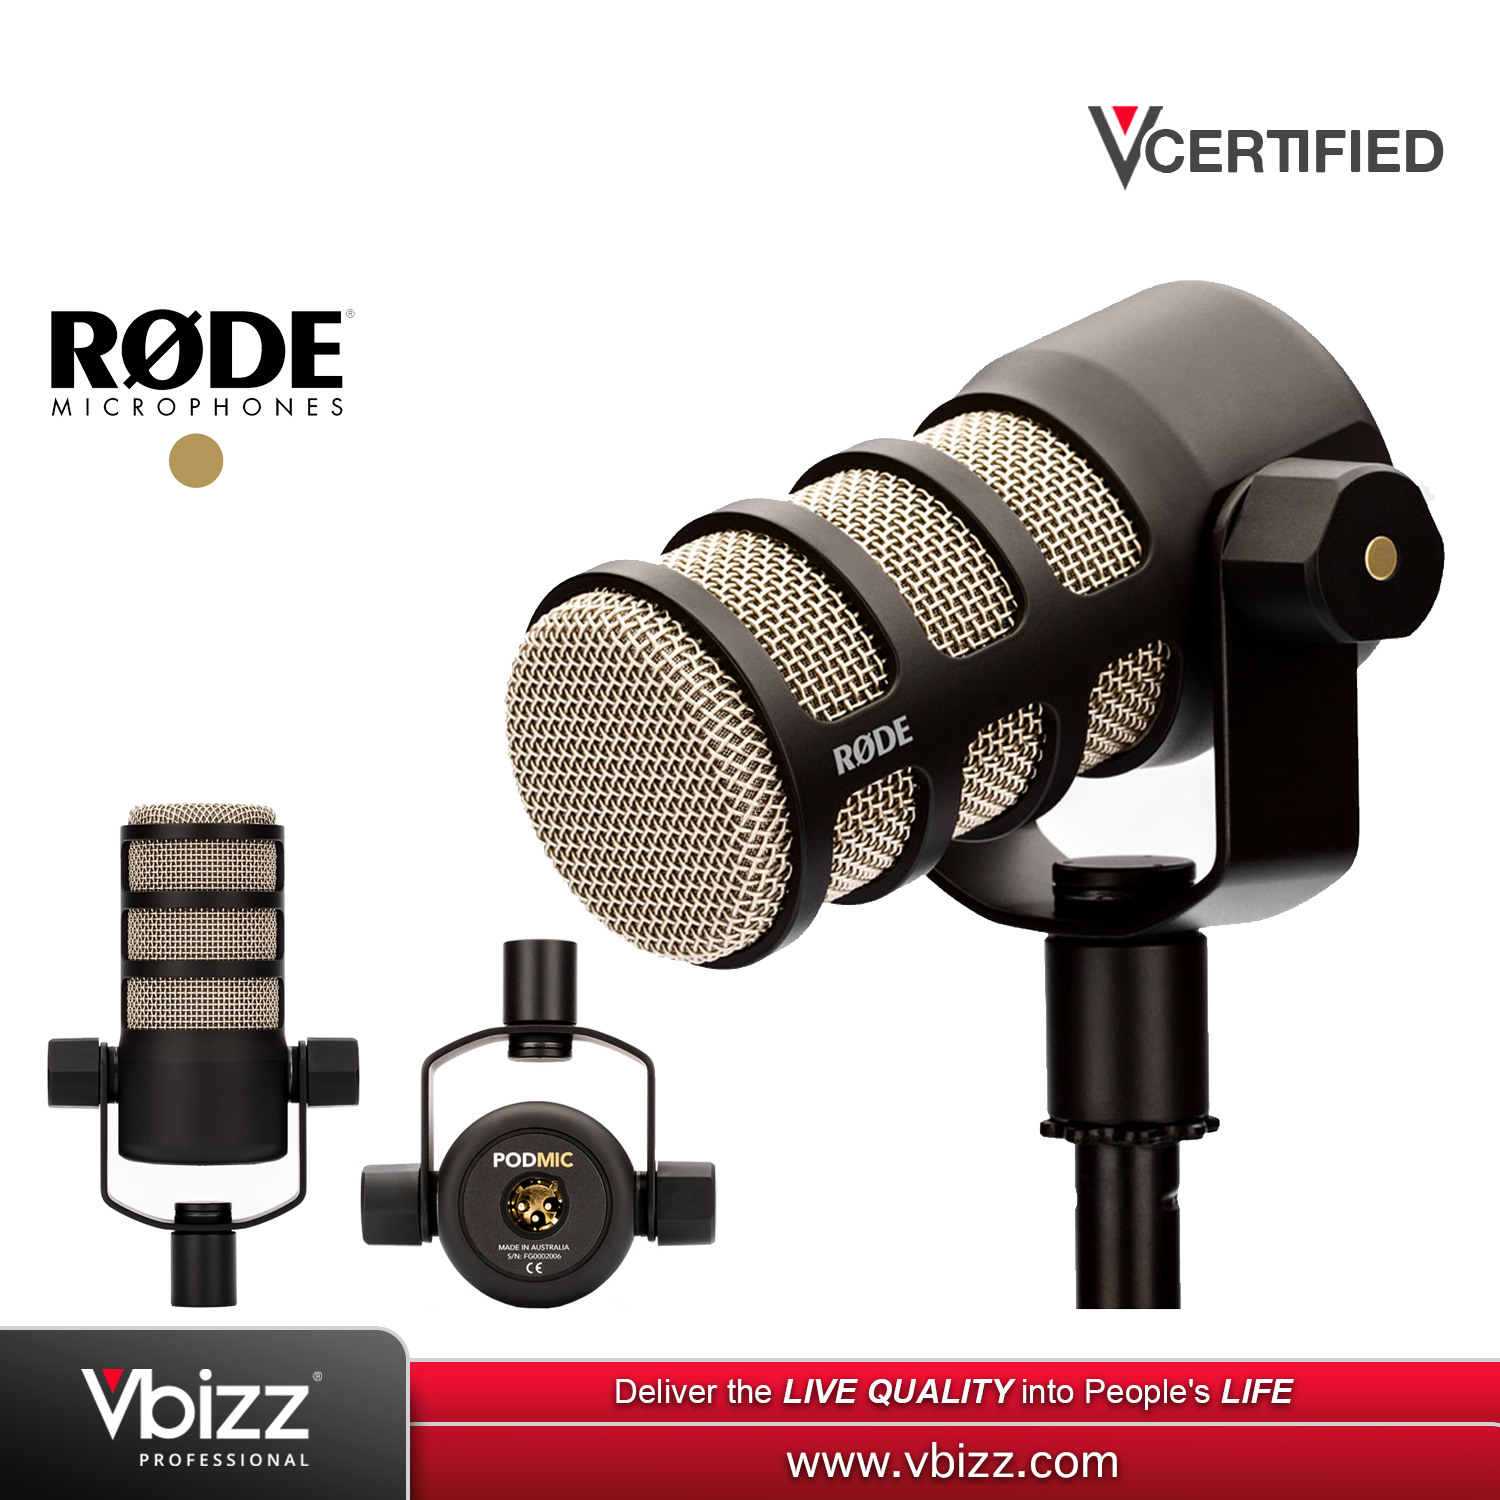 Rode PodMic review: Excellent sound quality at an aggressive price point